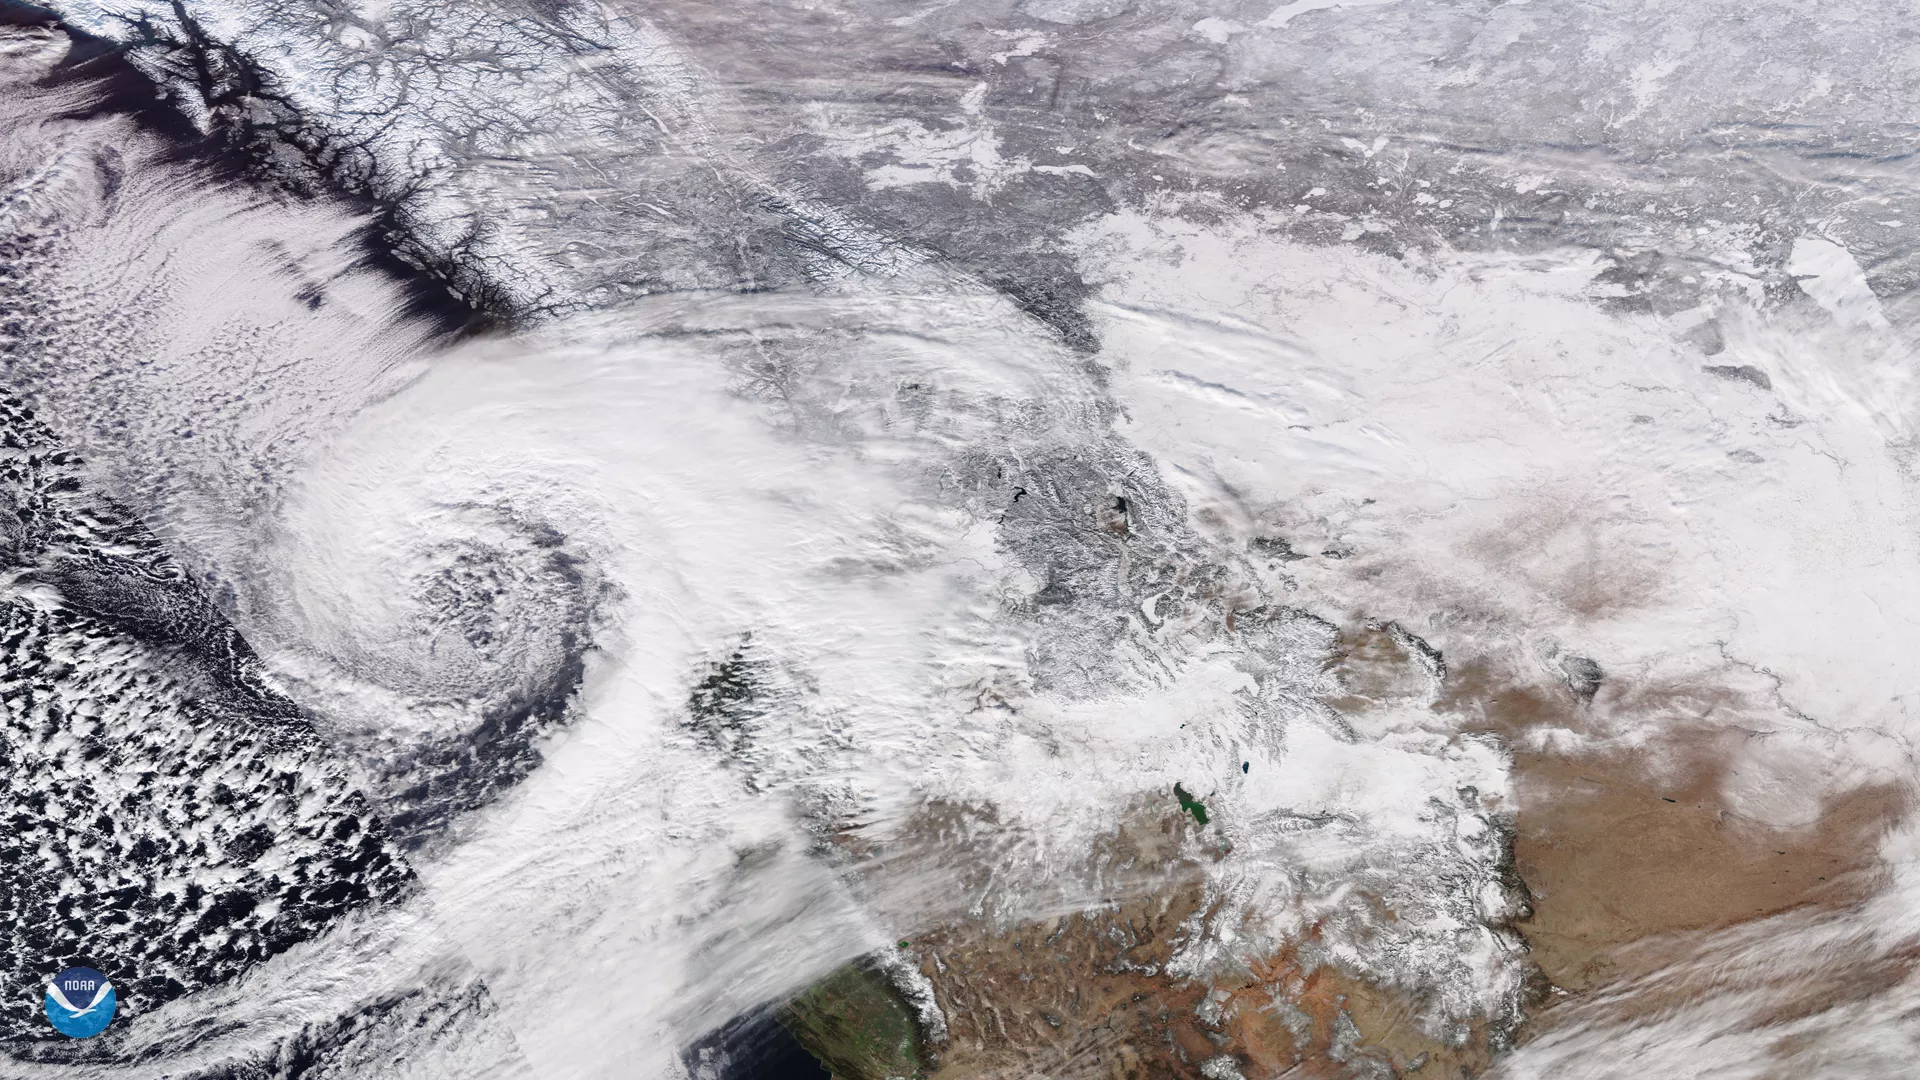 NOAA-20 TrueColor view of a low pressure system that has been bringing snowfall into British Columbia, Jan. 2020. 